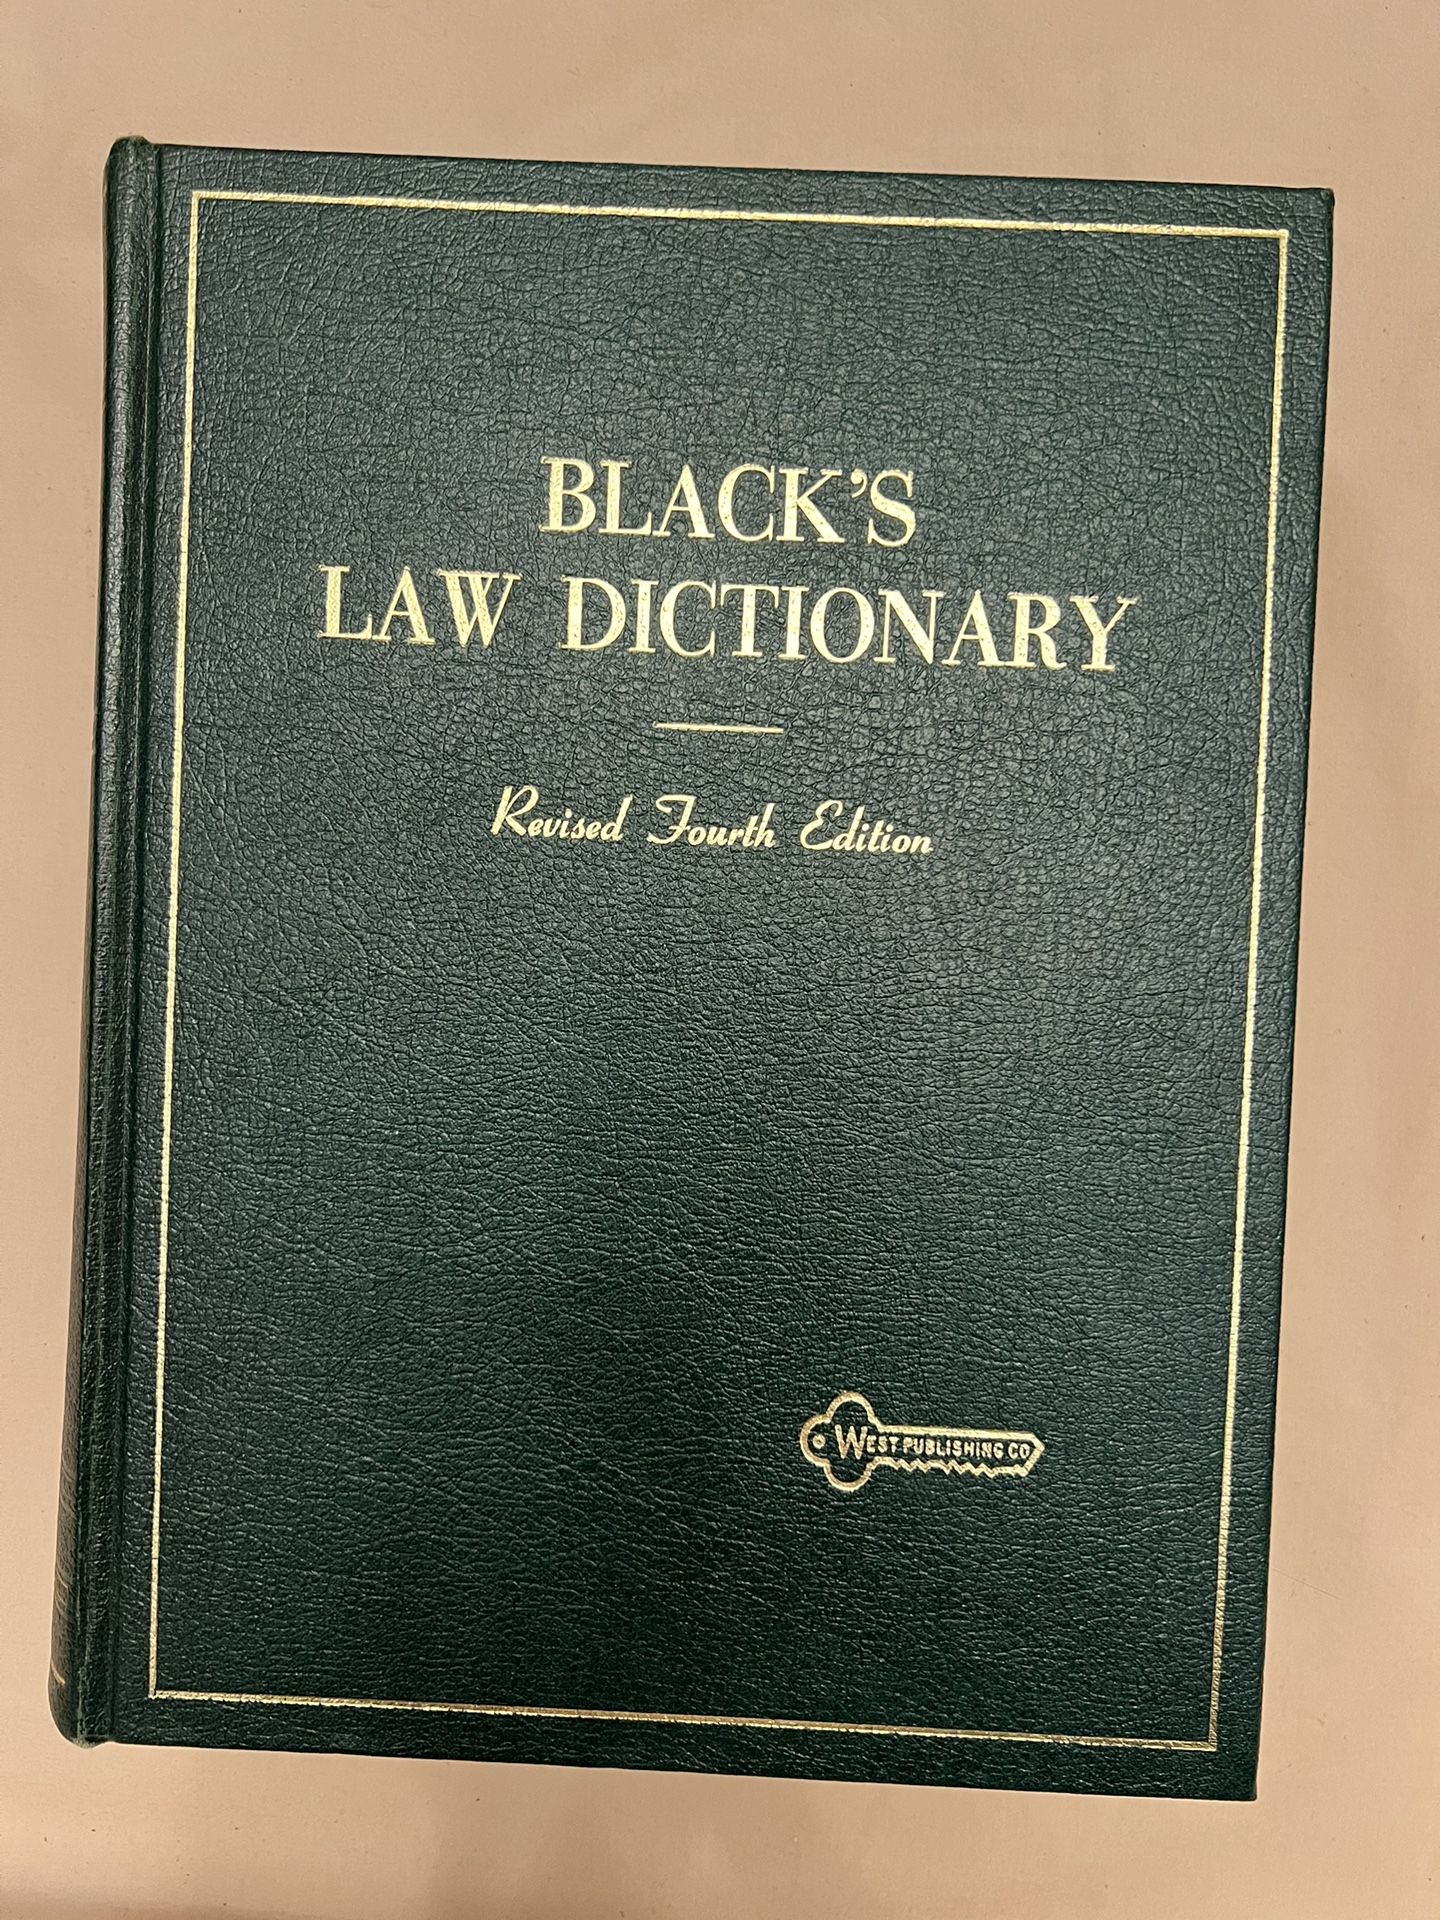 Black’s Law Dictionary Revised Fourth Edition